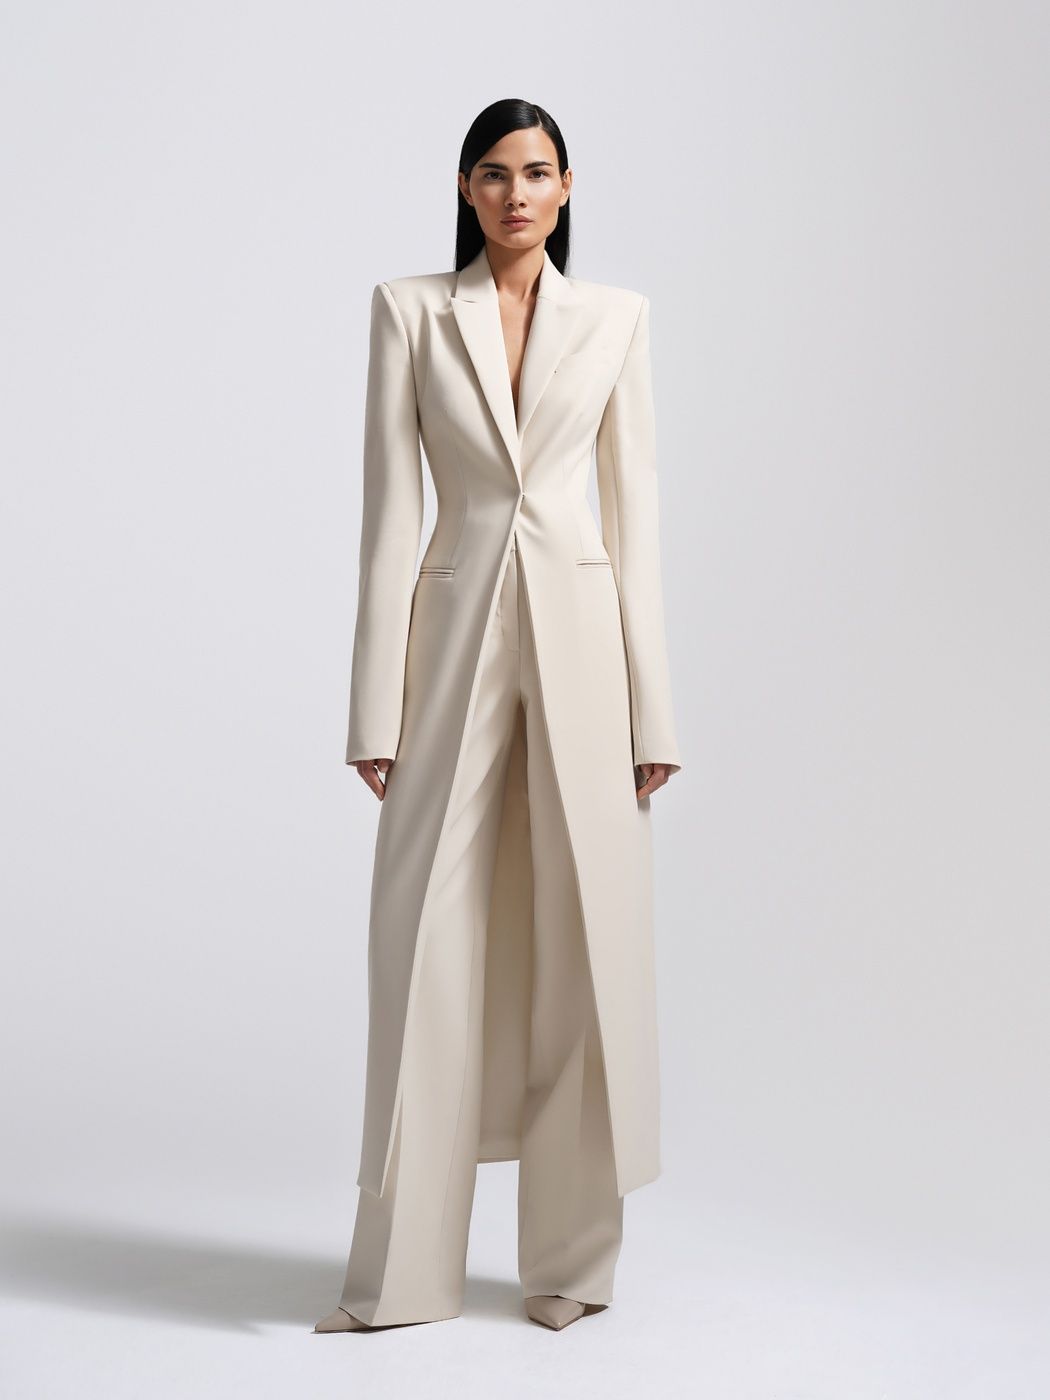 Longline Blazer and Jacket
  Outfit Ideas for Women